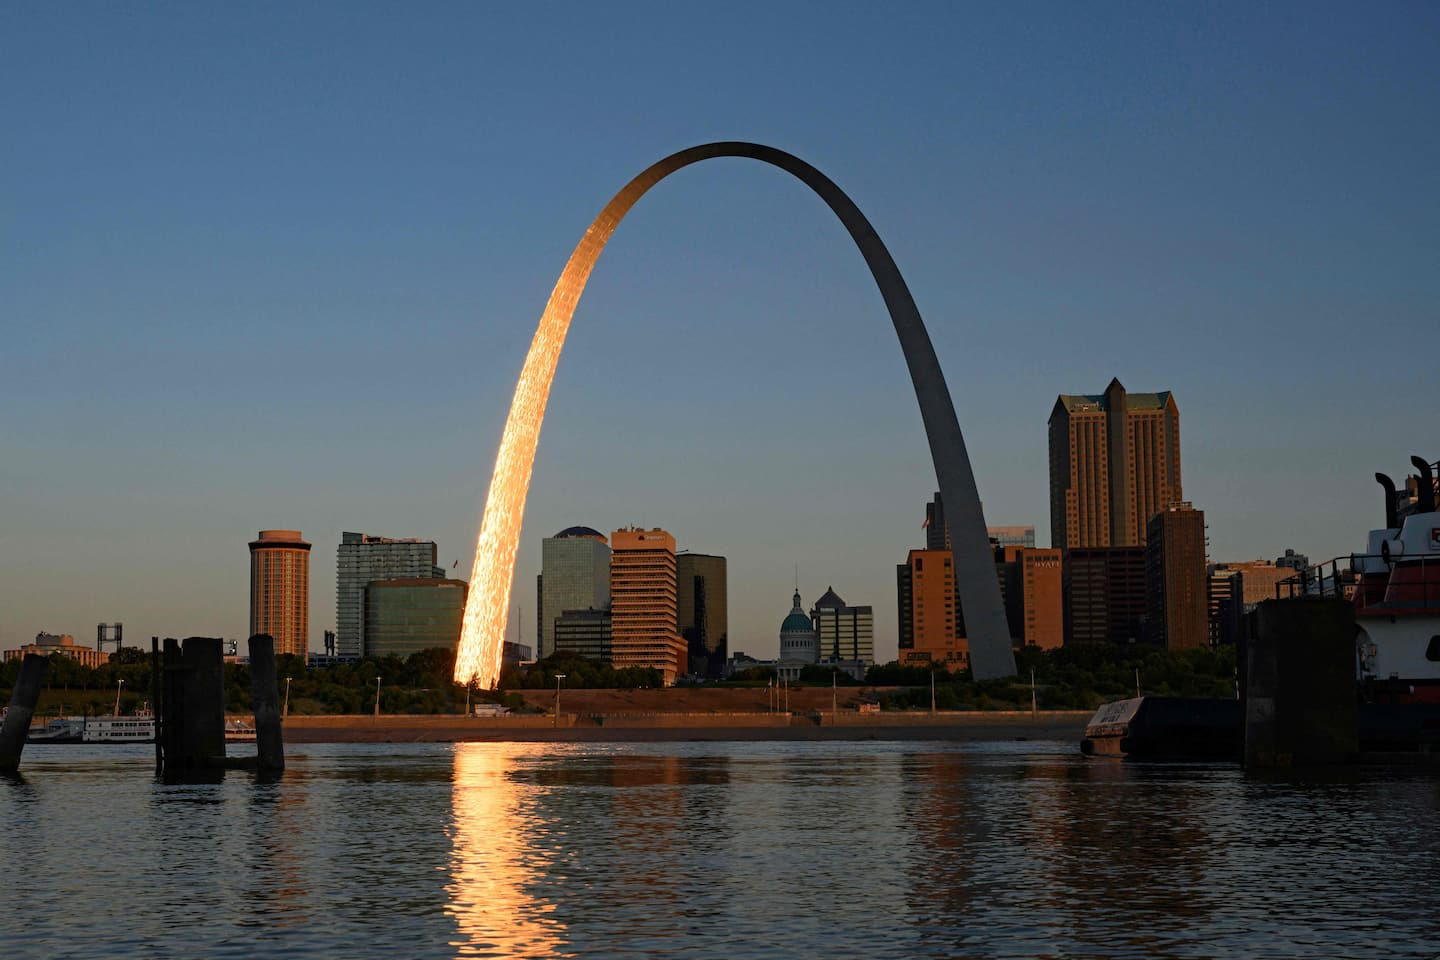 Abortion Access: Missouri Attorney General Sues City of St. Louis